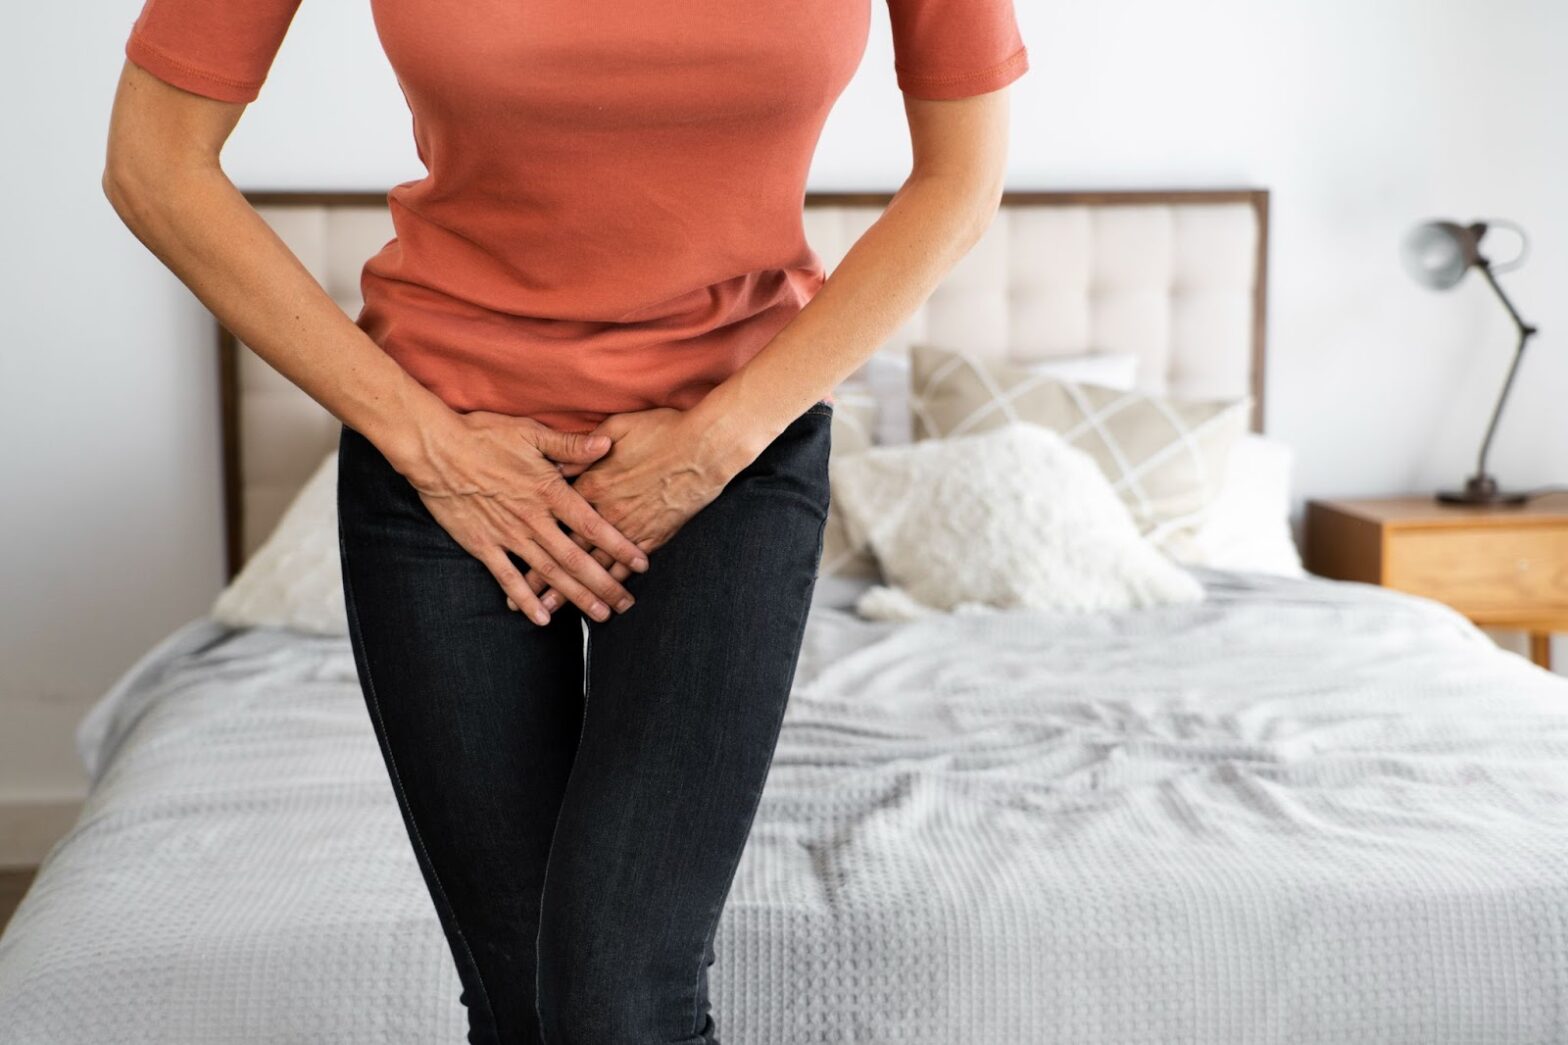 Pelvic Inflammatory Disease: What You Need to Know